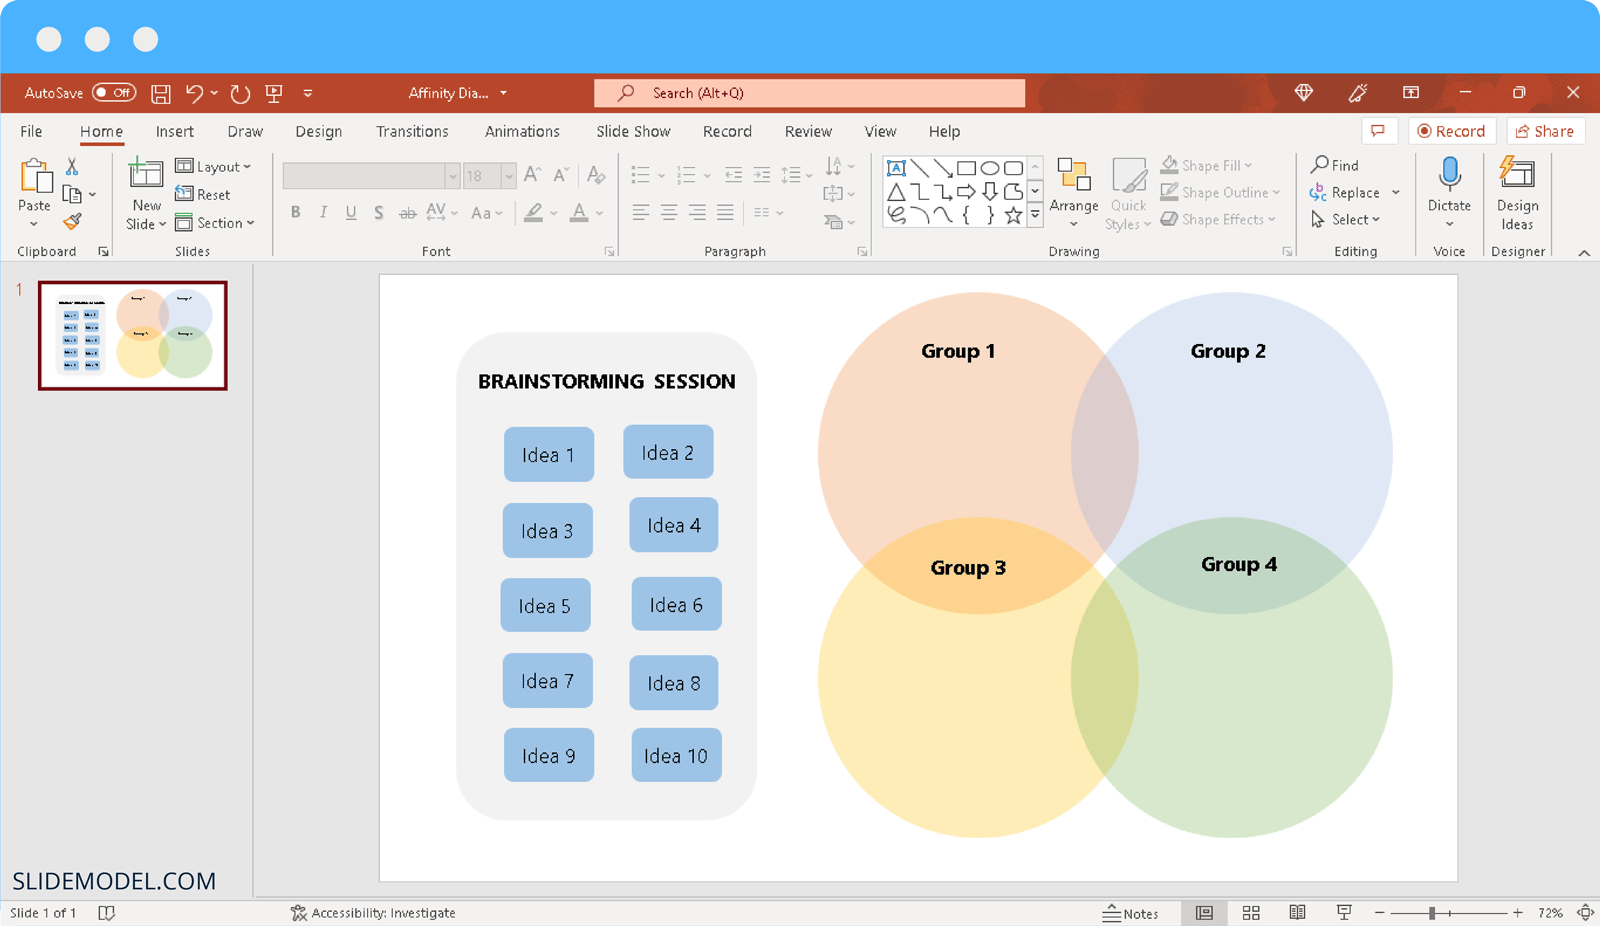 Method One: Creating an Affinity Diagram Using PowerPoint Shapes